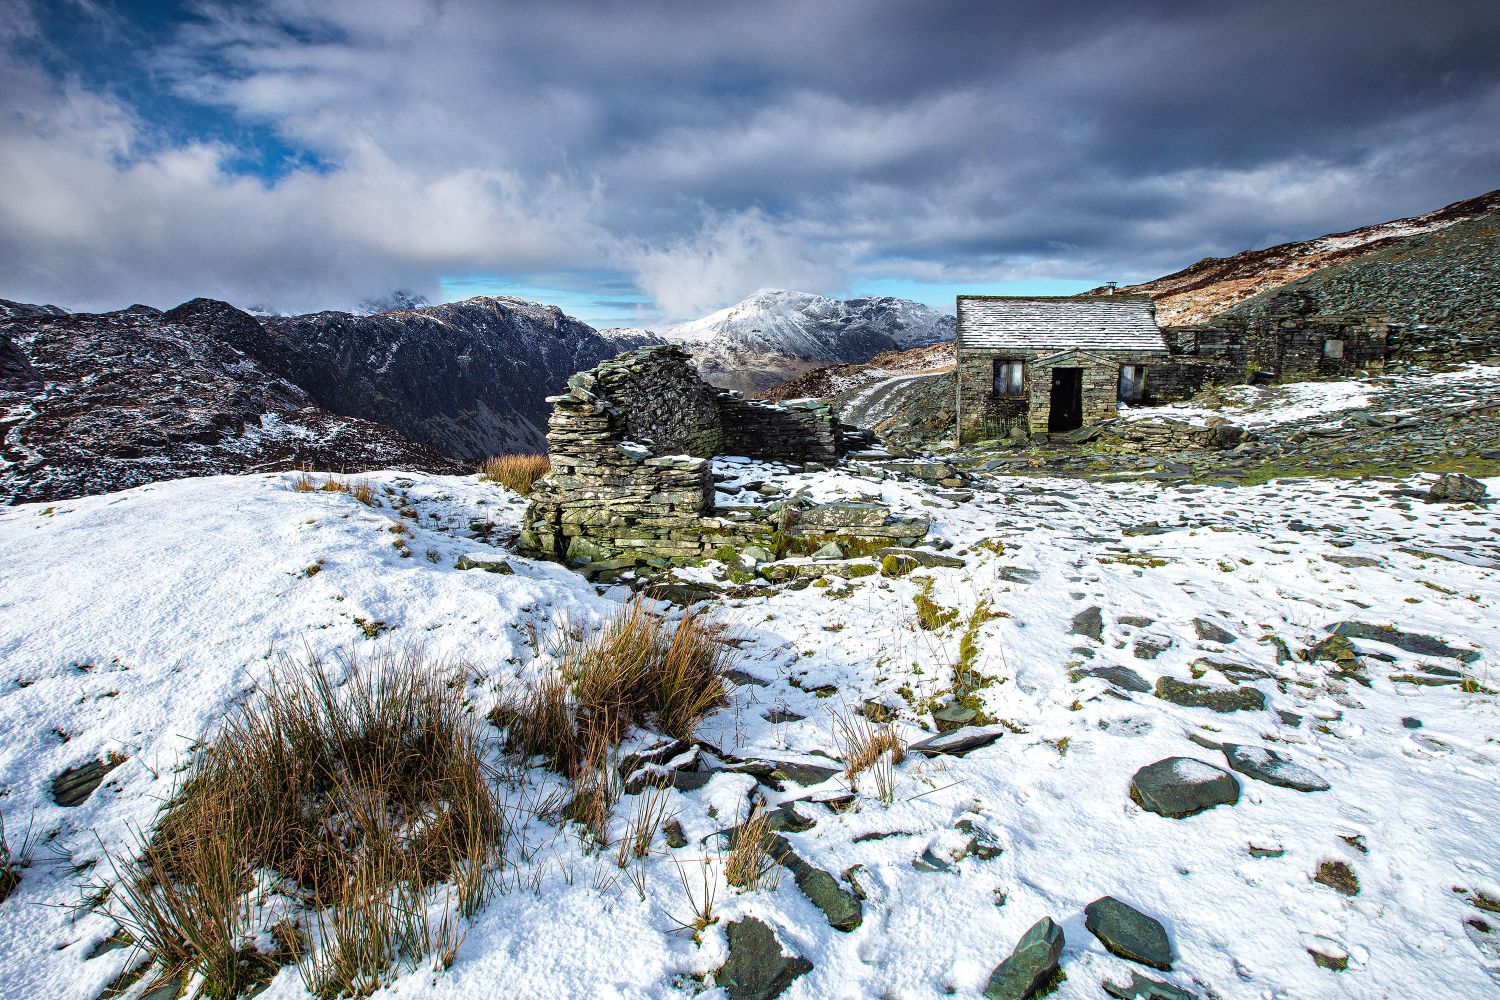 High Stile, Haystacks and Dubbs Hut from the ascent of Haystacks by Martin Lawrence Photography